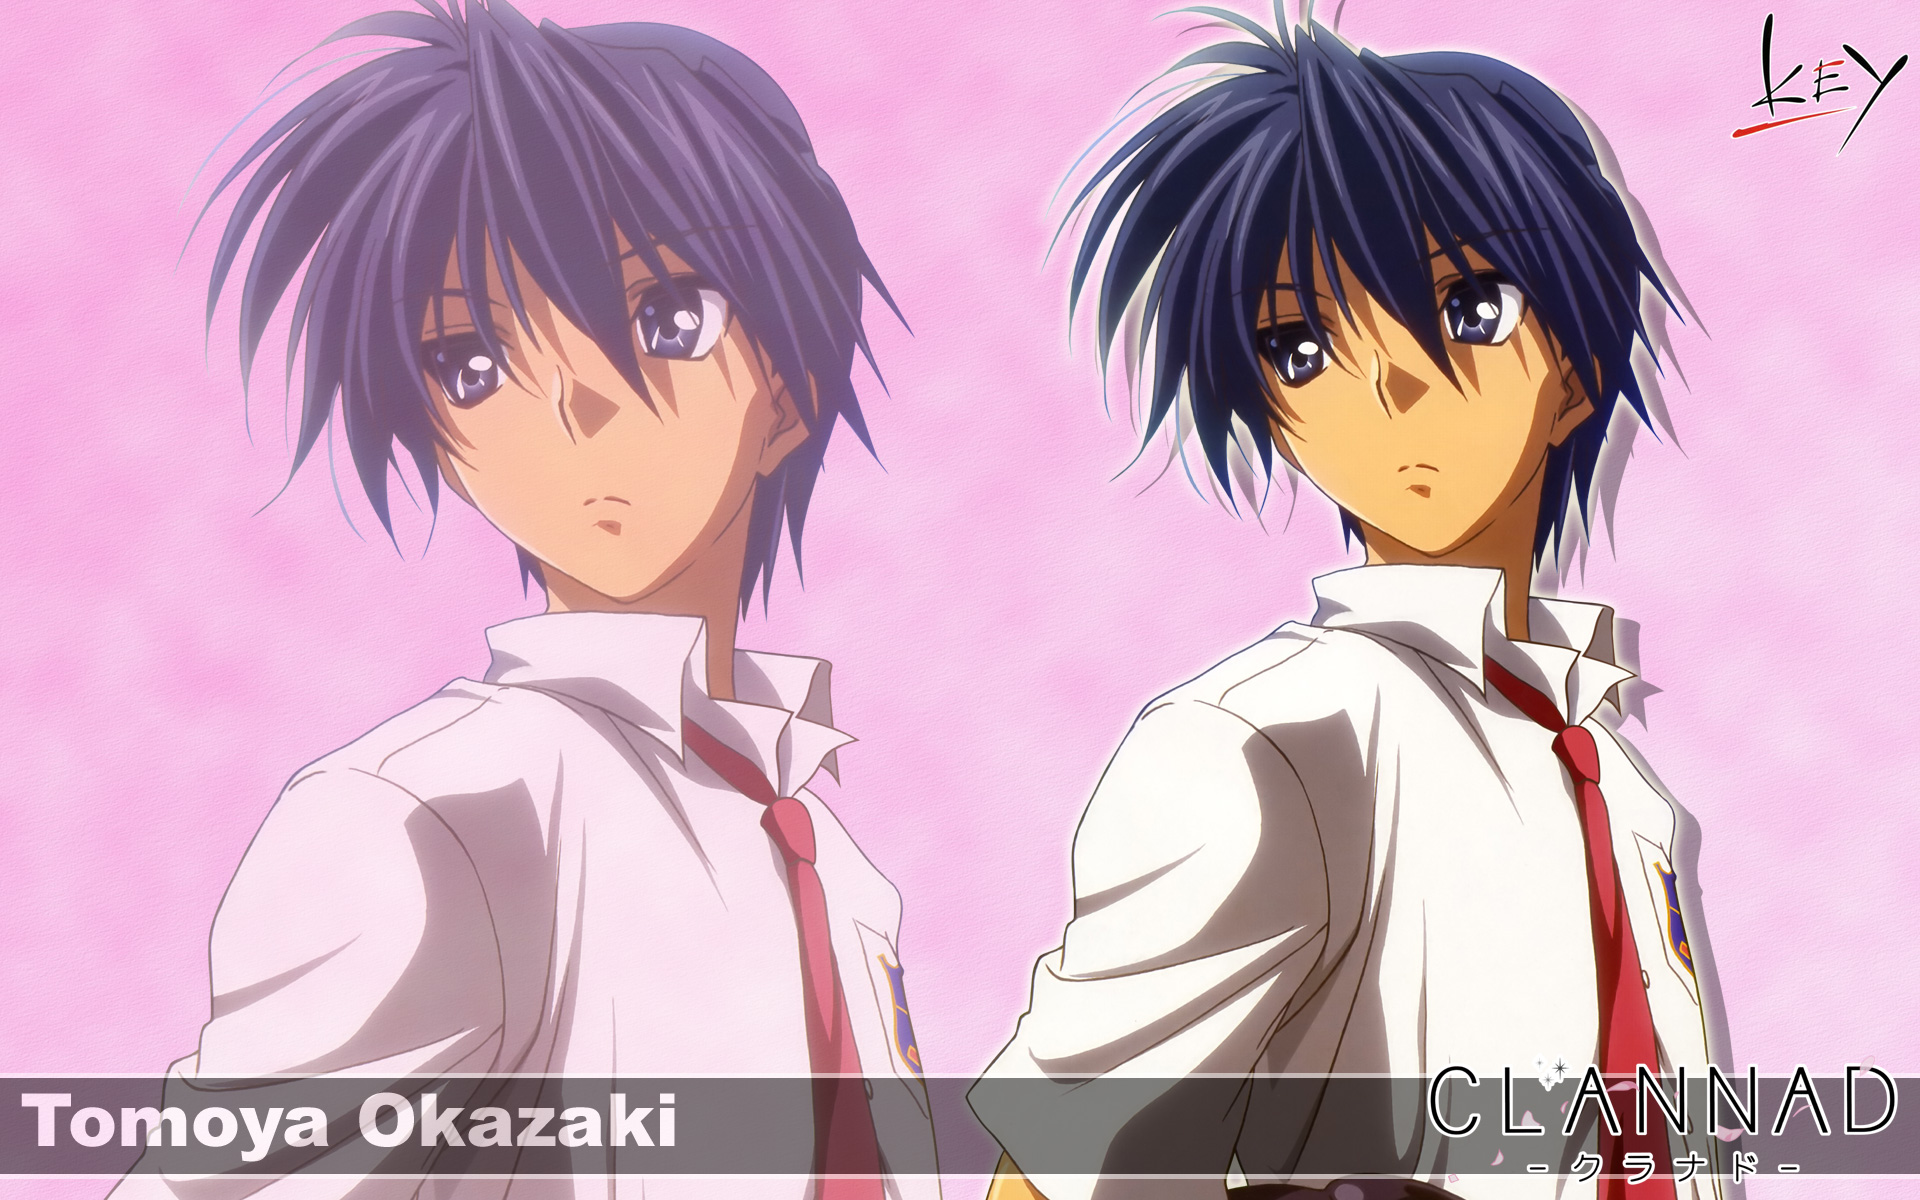 Tomoya Okazaki, a character from Clannad, in an anime-style artwork.